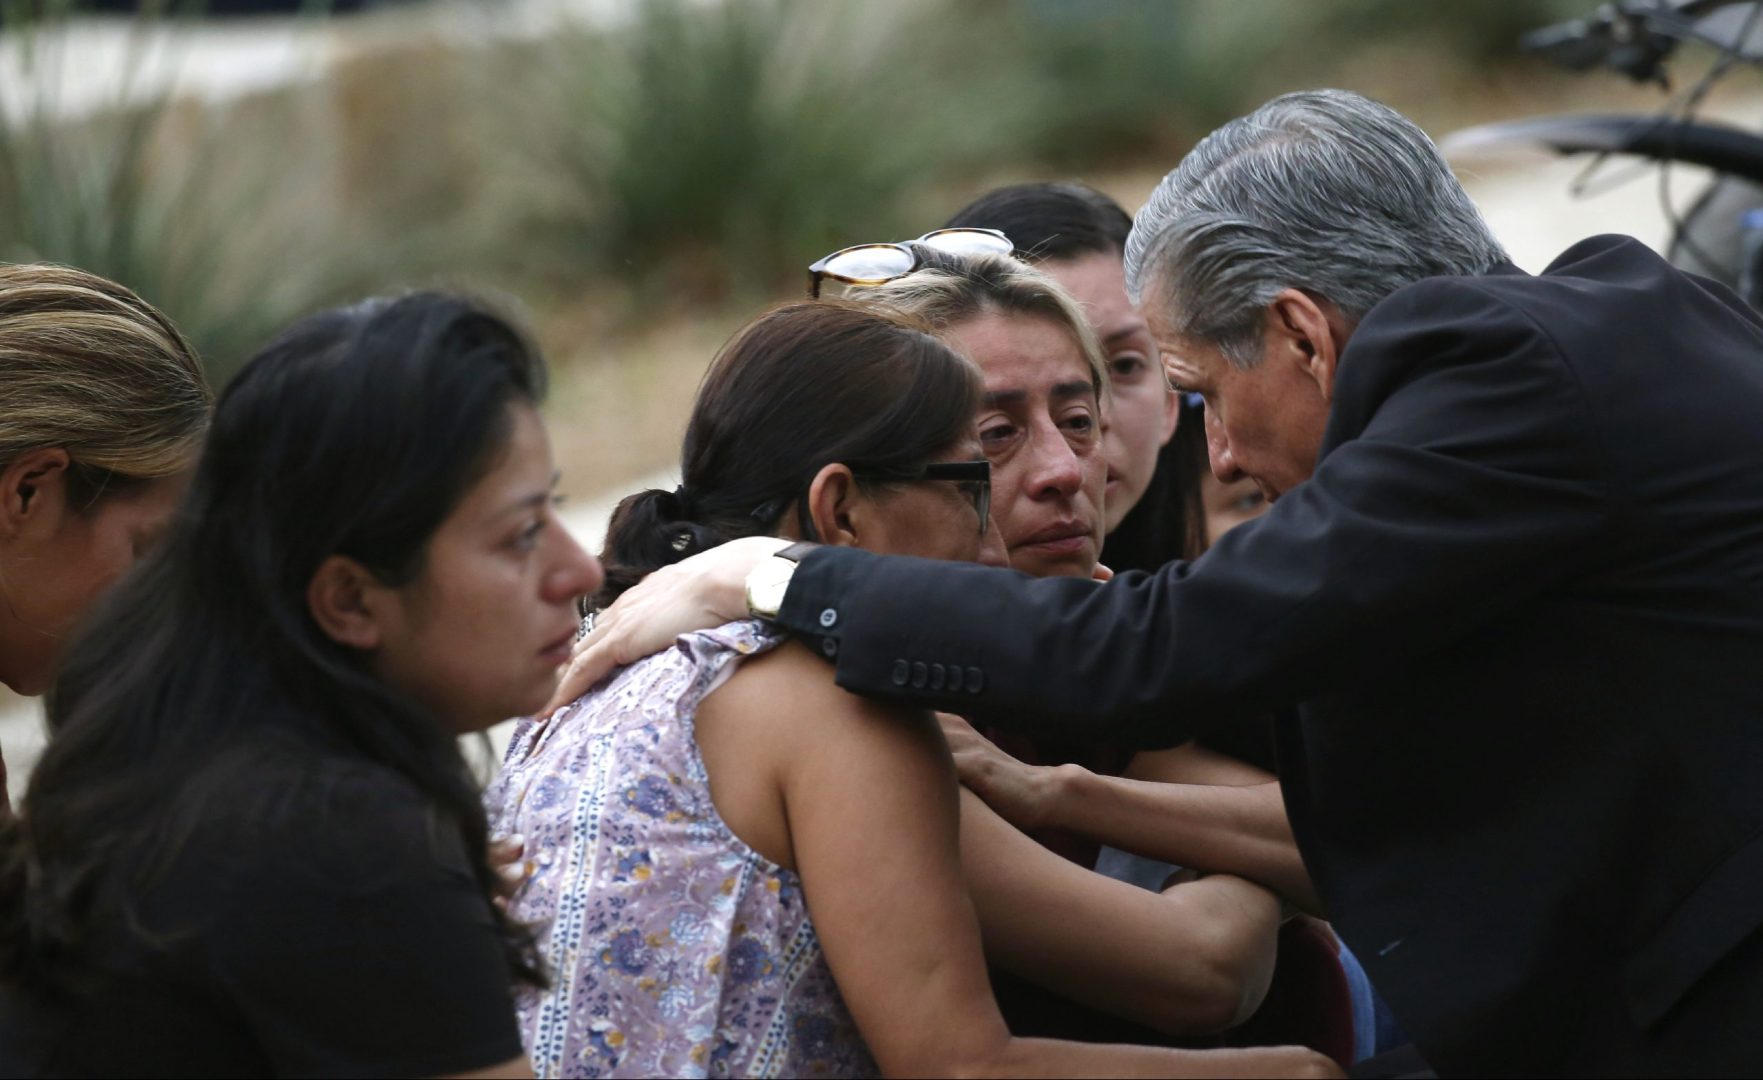 The archbishop of San Antonio, Gustavo Garcia-Siller, comforts families outside the Civic Center following a deadly school shooting at Robb Elementary School in Uvalde, Texas, Tuesday, May 24, 2022. 